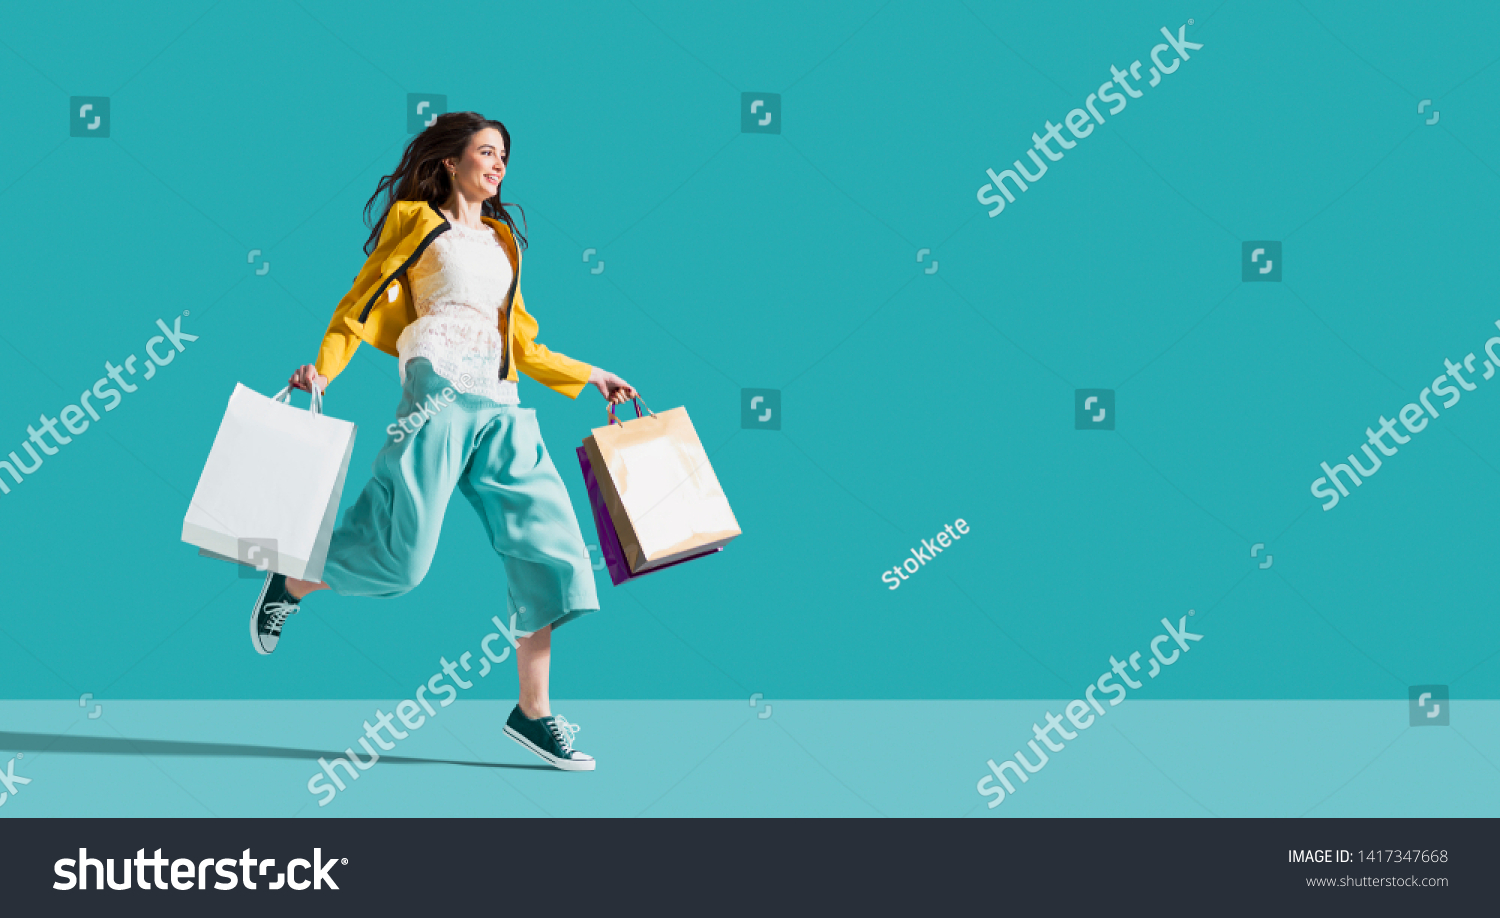 Cheerful happy woman enjoying shopping: she is carrying shopping bags and running to get the latest offers at the shopping center #1417347668